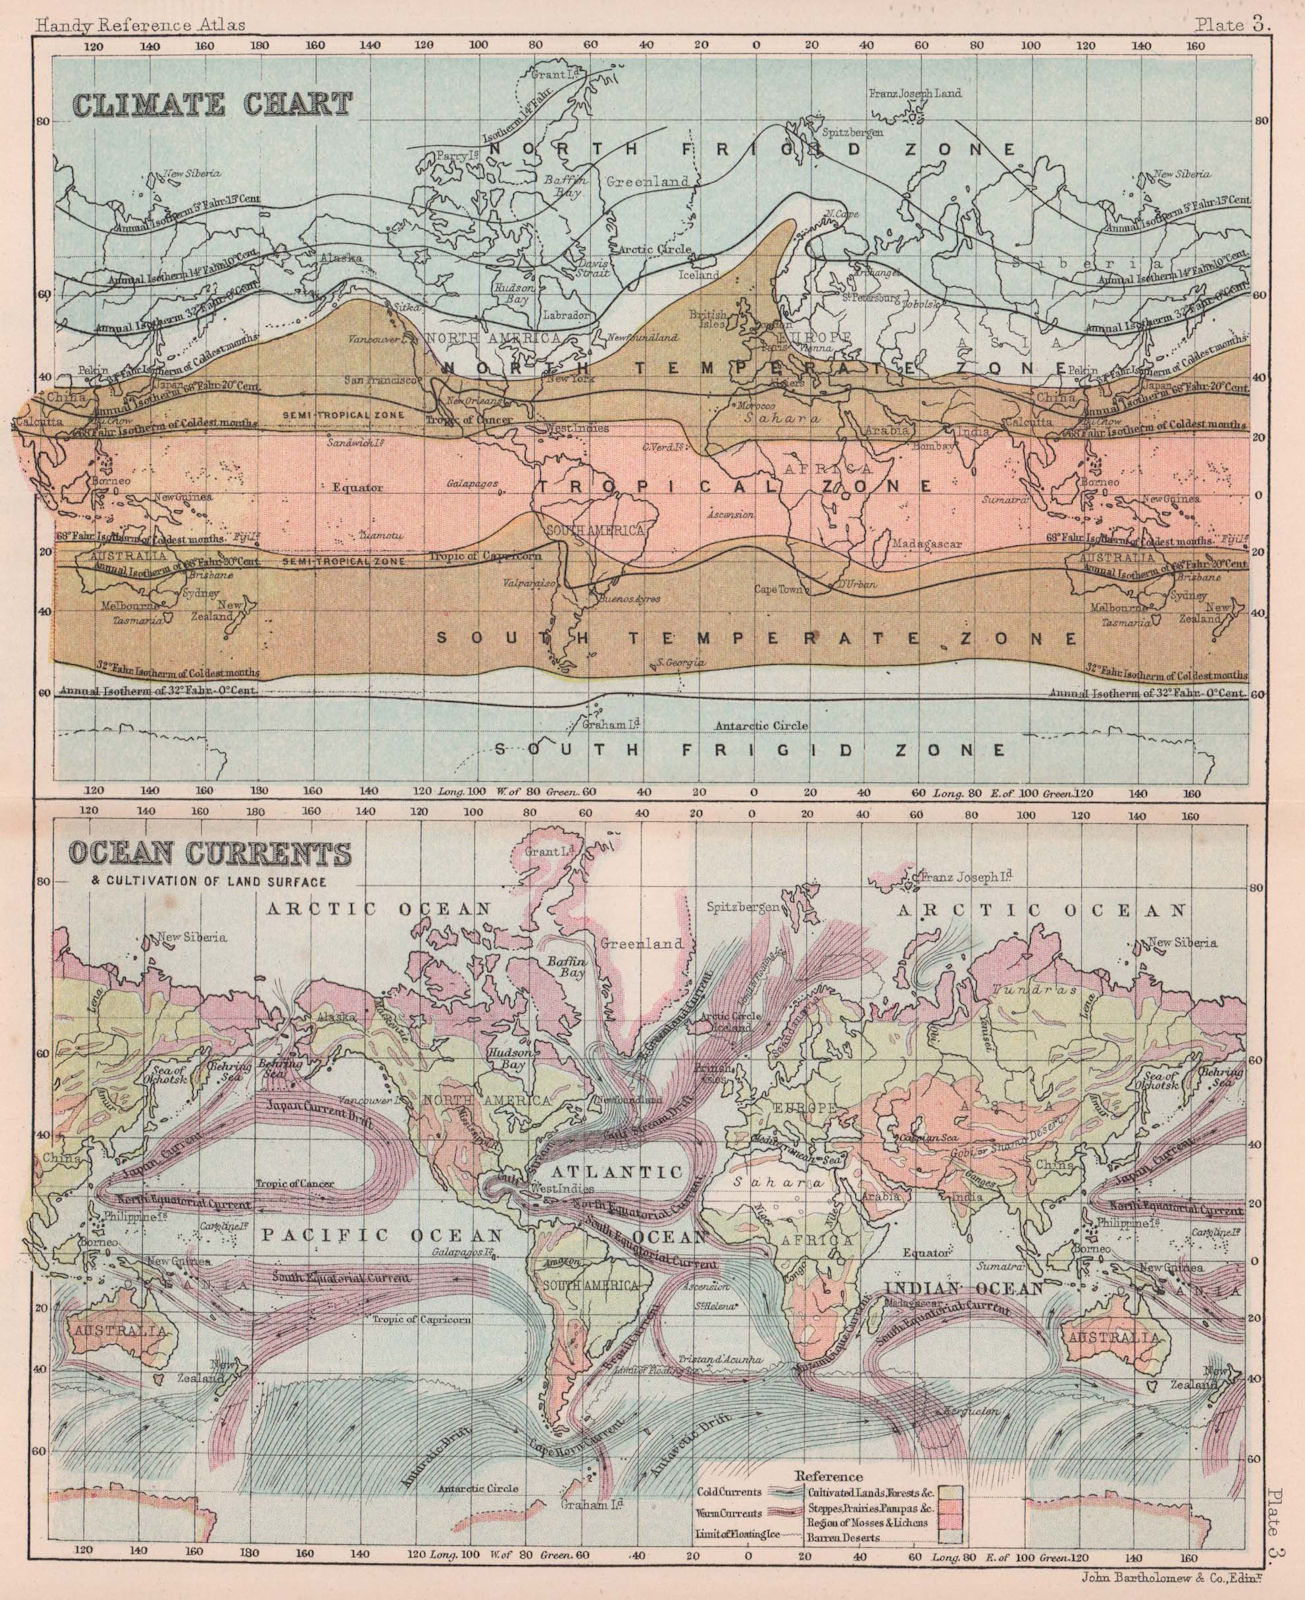 Associate Product Climate Chart, Ocean Currents & Land cultivation. World. BARTHOLOMEW 1893 map